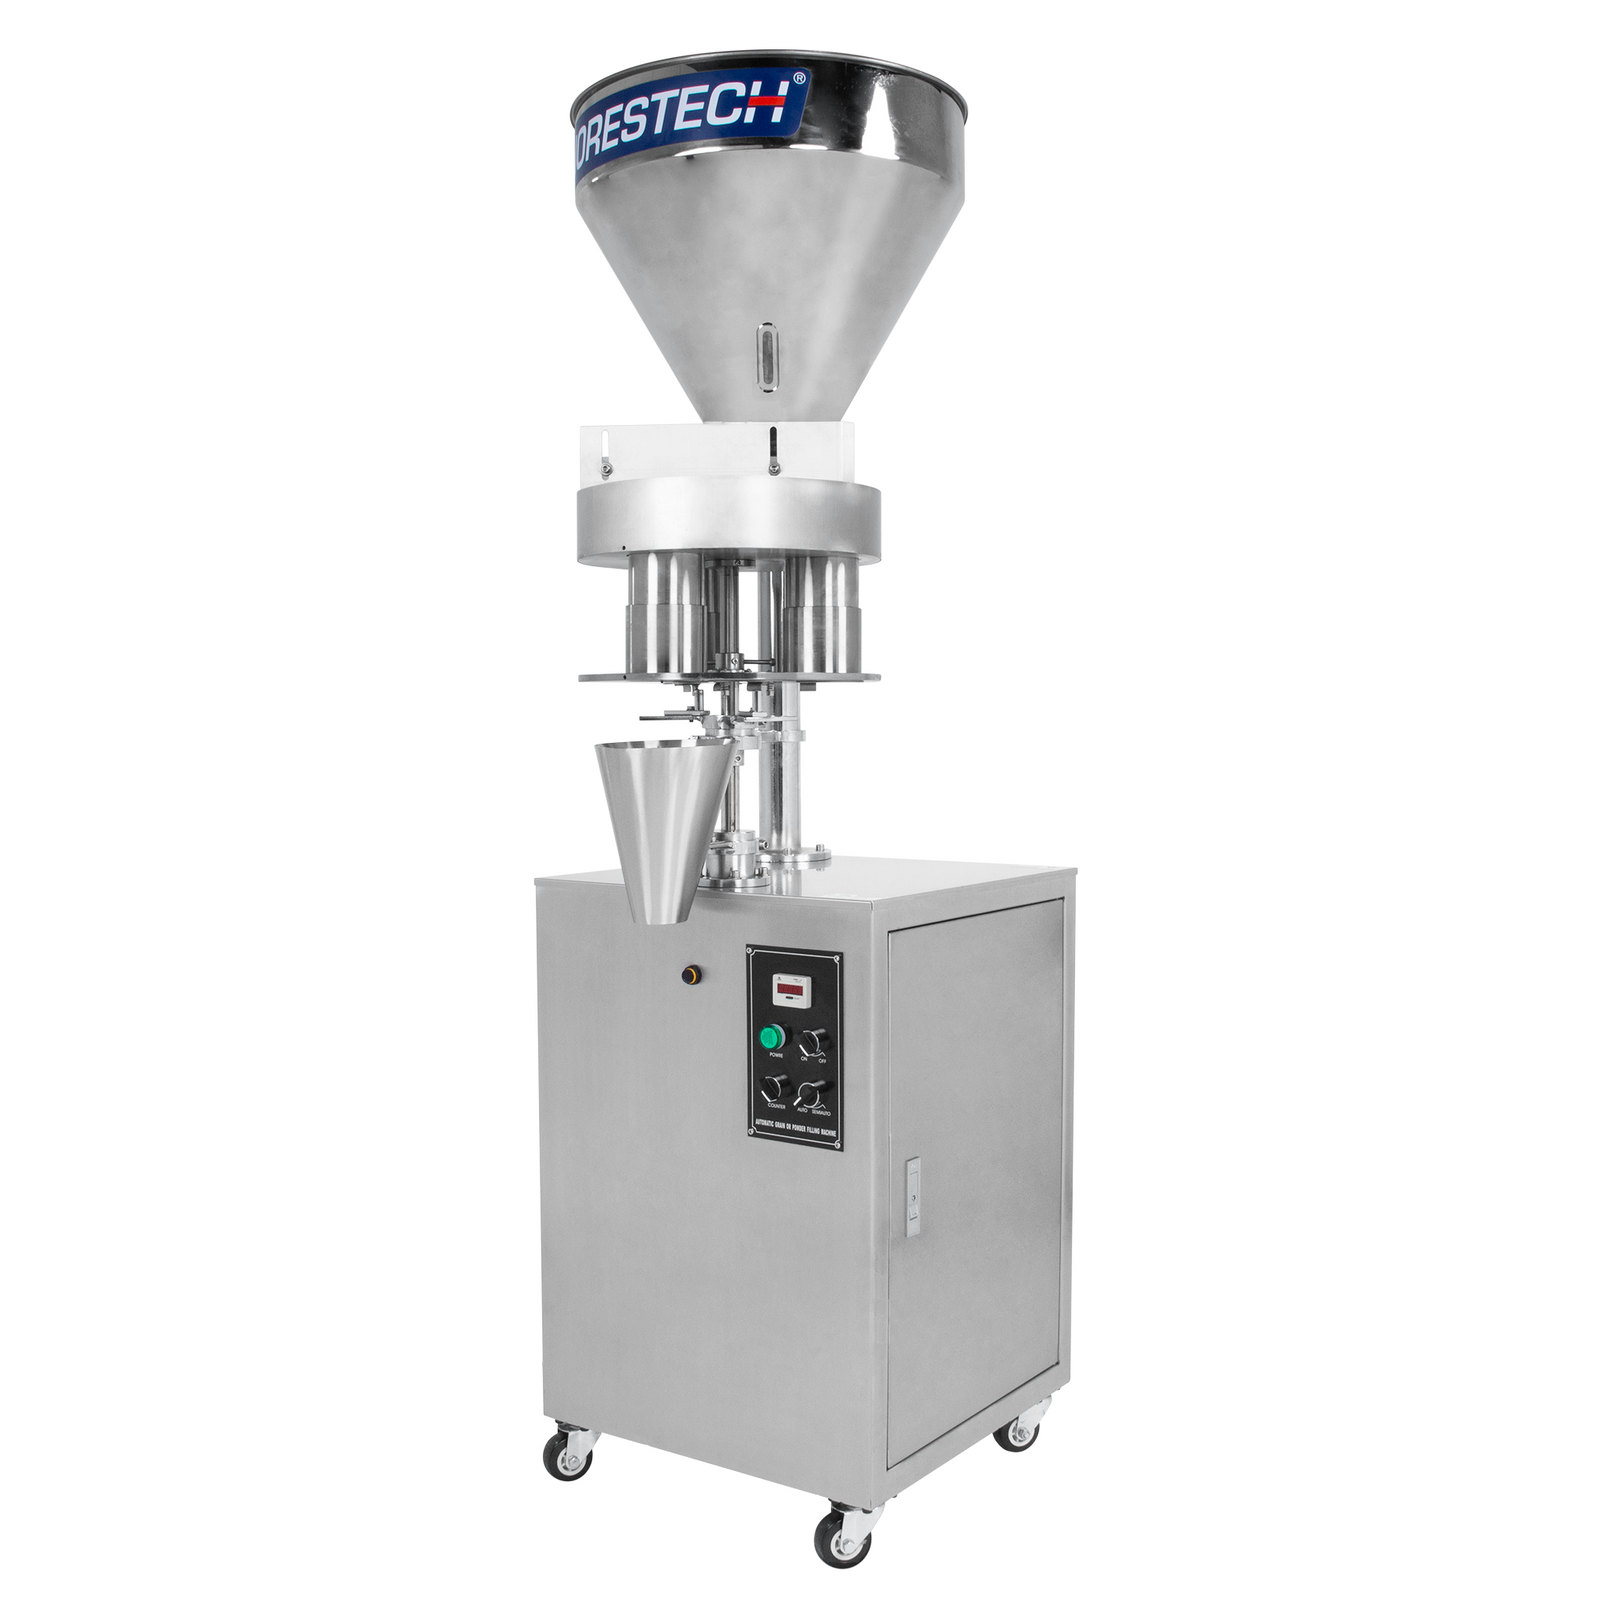 Stainless steel JORES TECHNOLOGIES® semi automatic volumetric filler for free-flowing granular products in a diagonal view